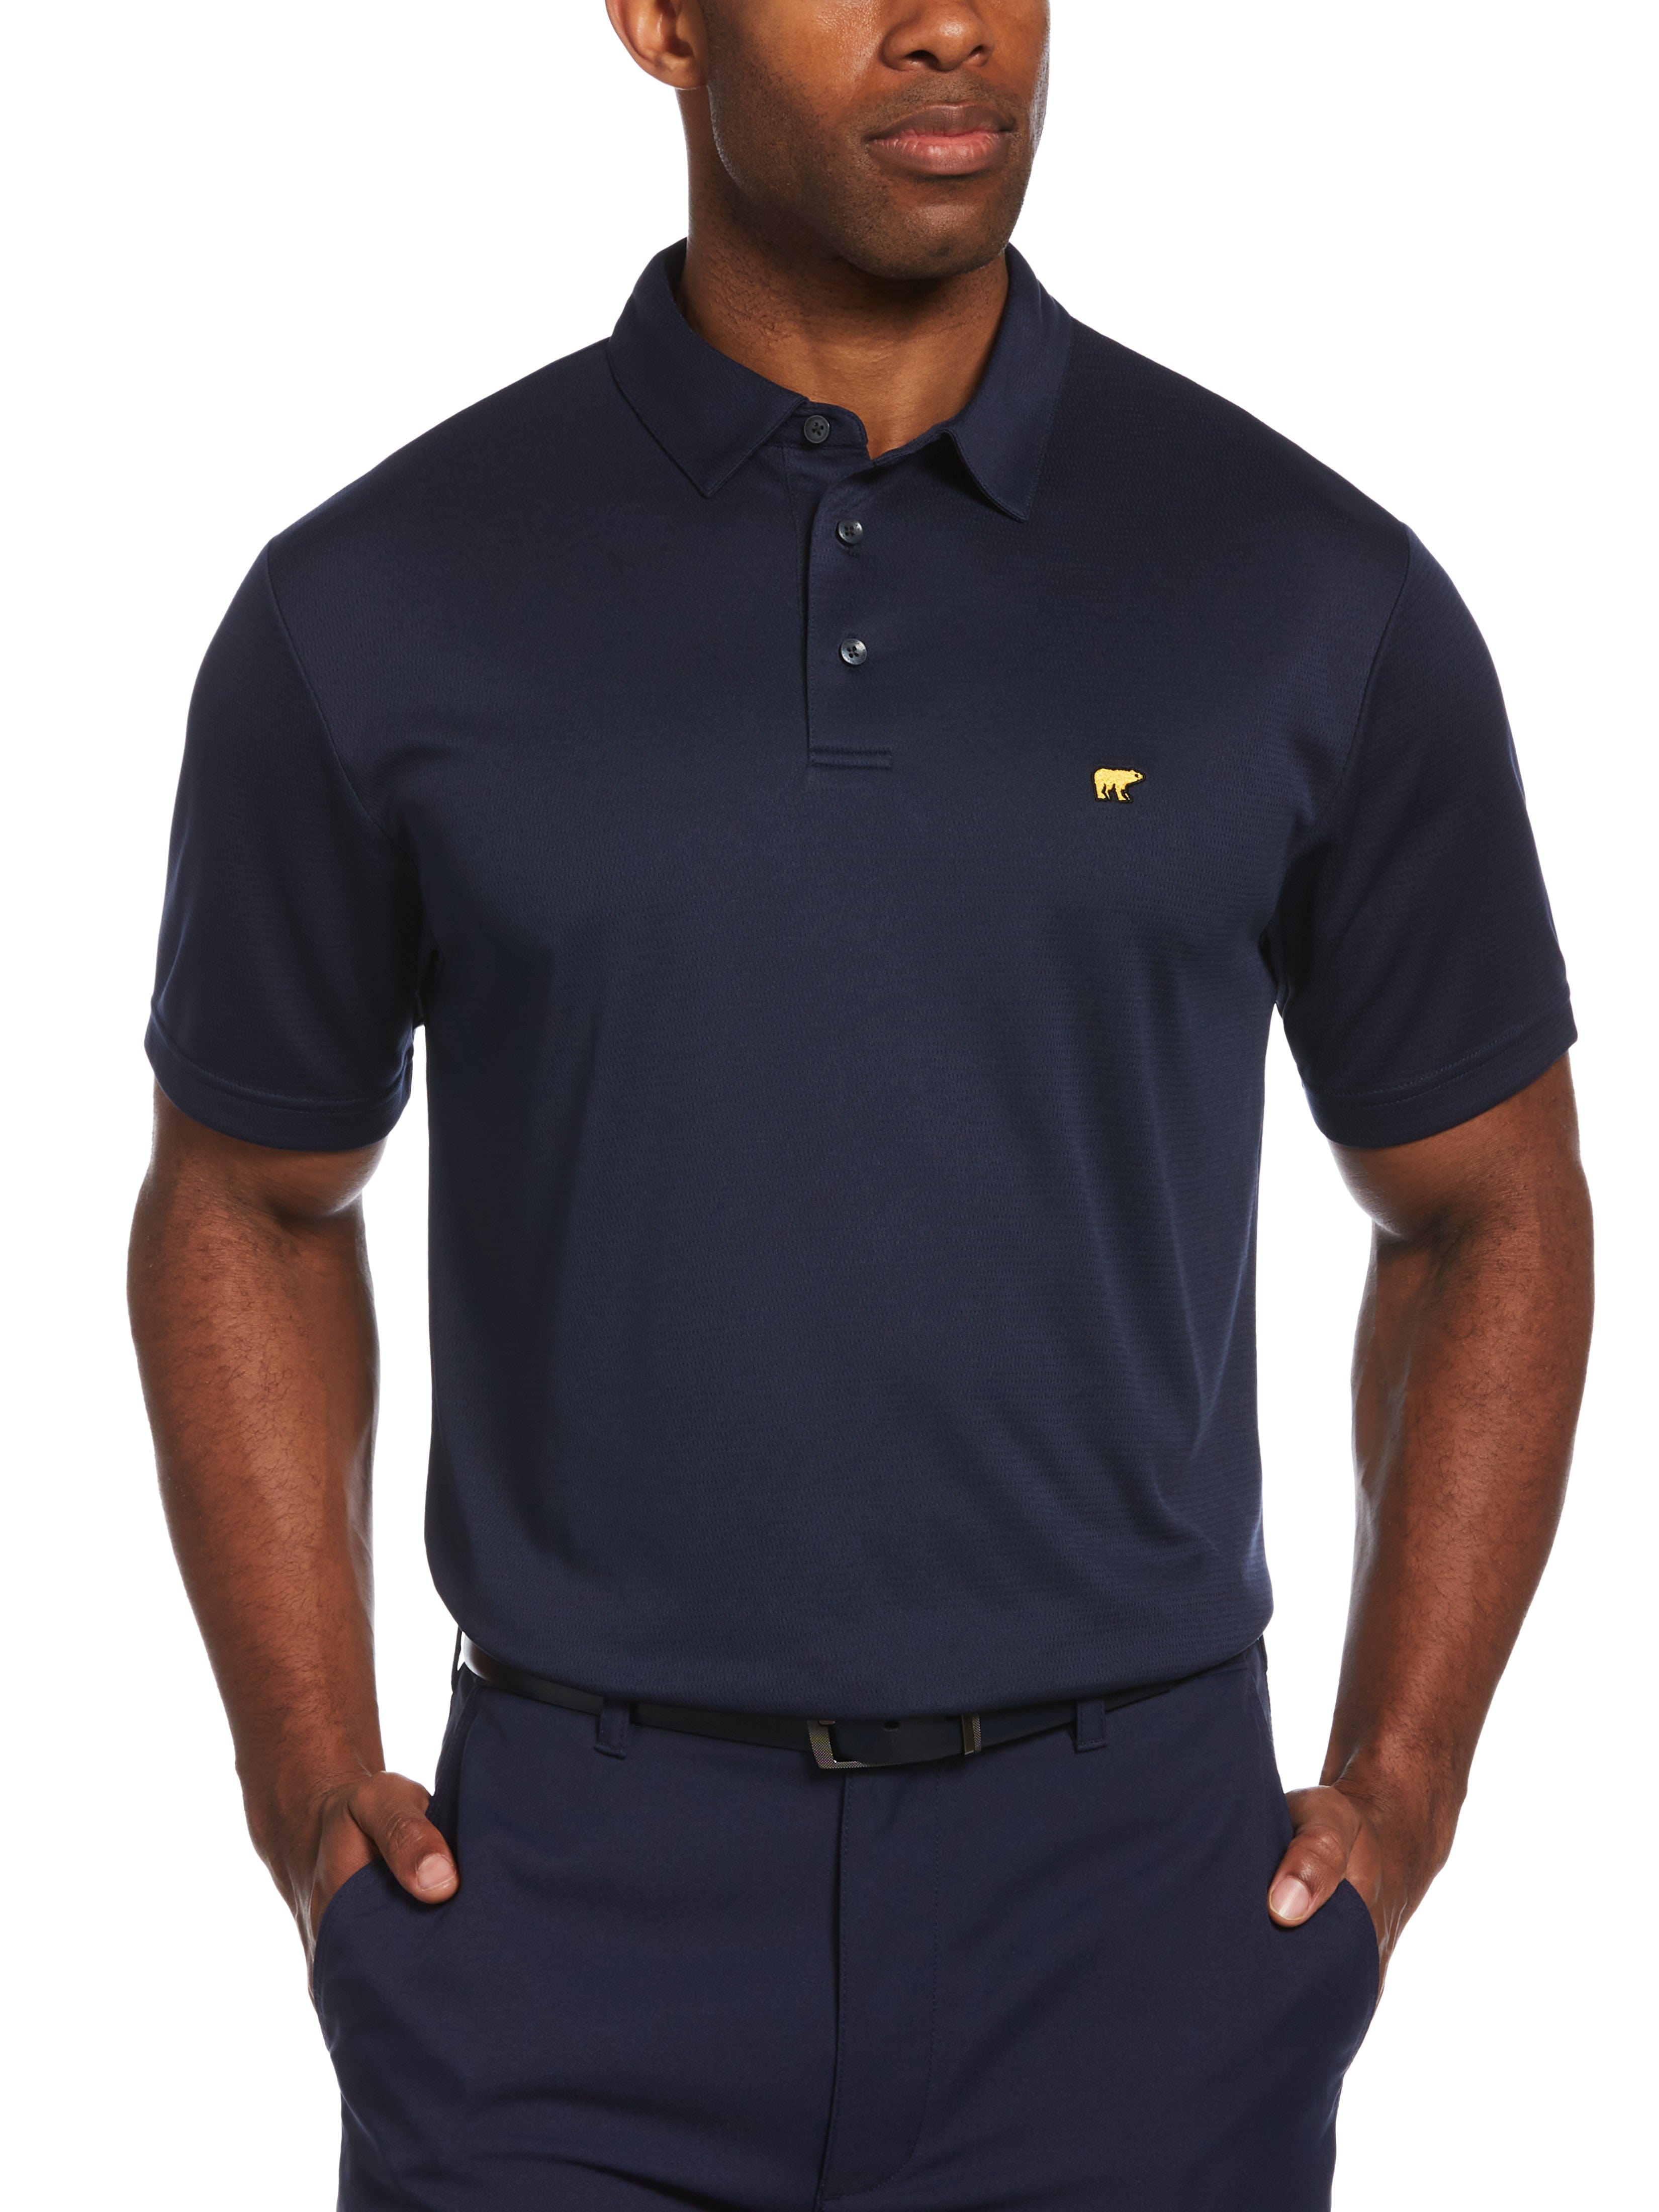 Jack Nicklaus Mens Solid Textured Golf Polo Shirt, Size 2XL, Classic Navy Blue, 100% Polyester | Golf Apparel Shop